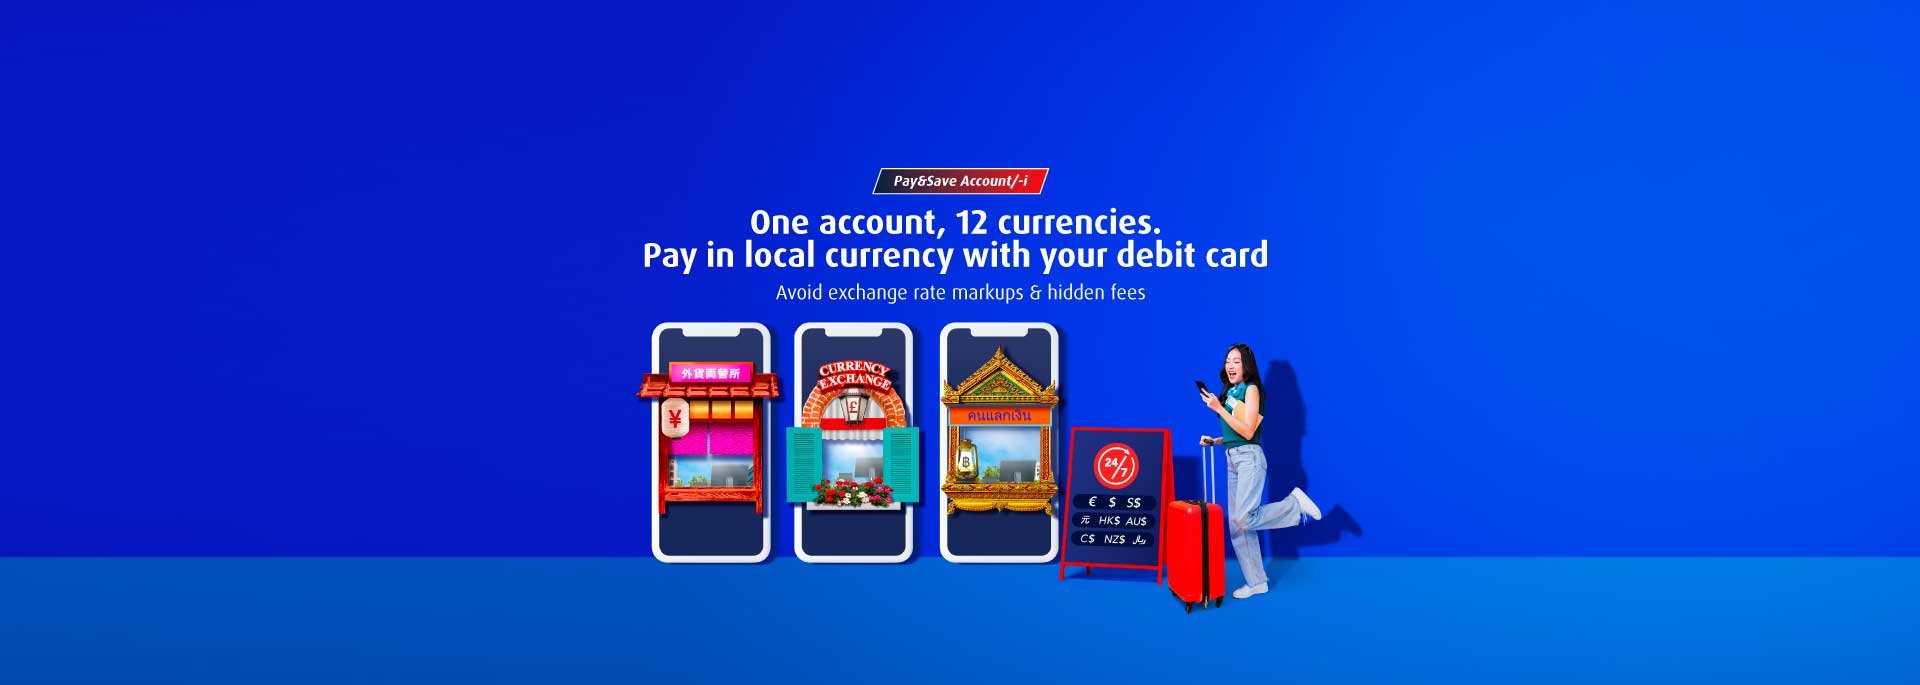 One account, 12 currencies. Pay in local currency with your debit card